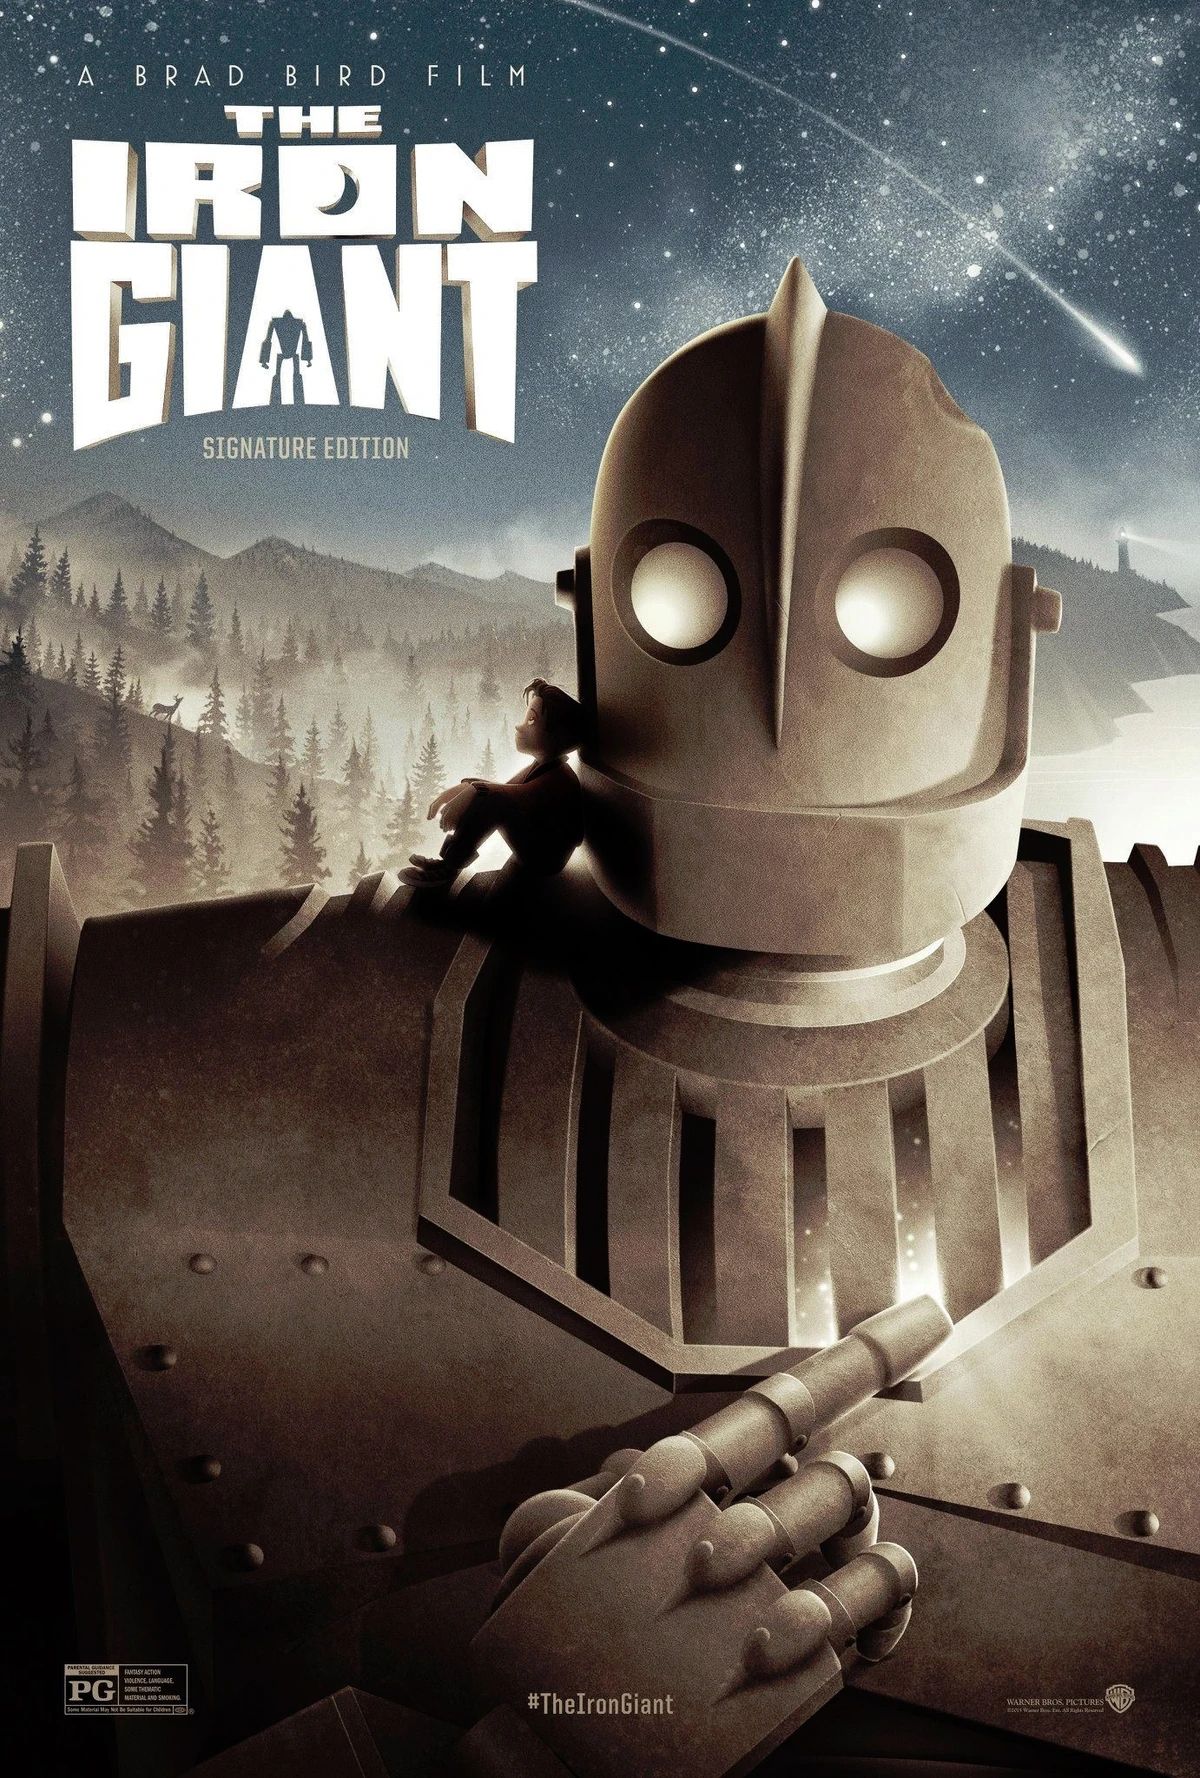 What Happened to 'The Iron Giant' Sequel?